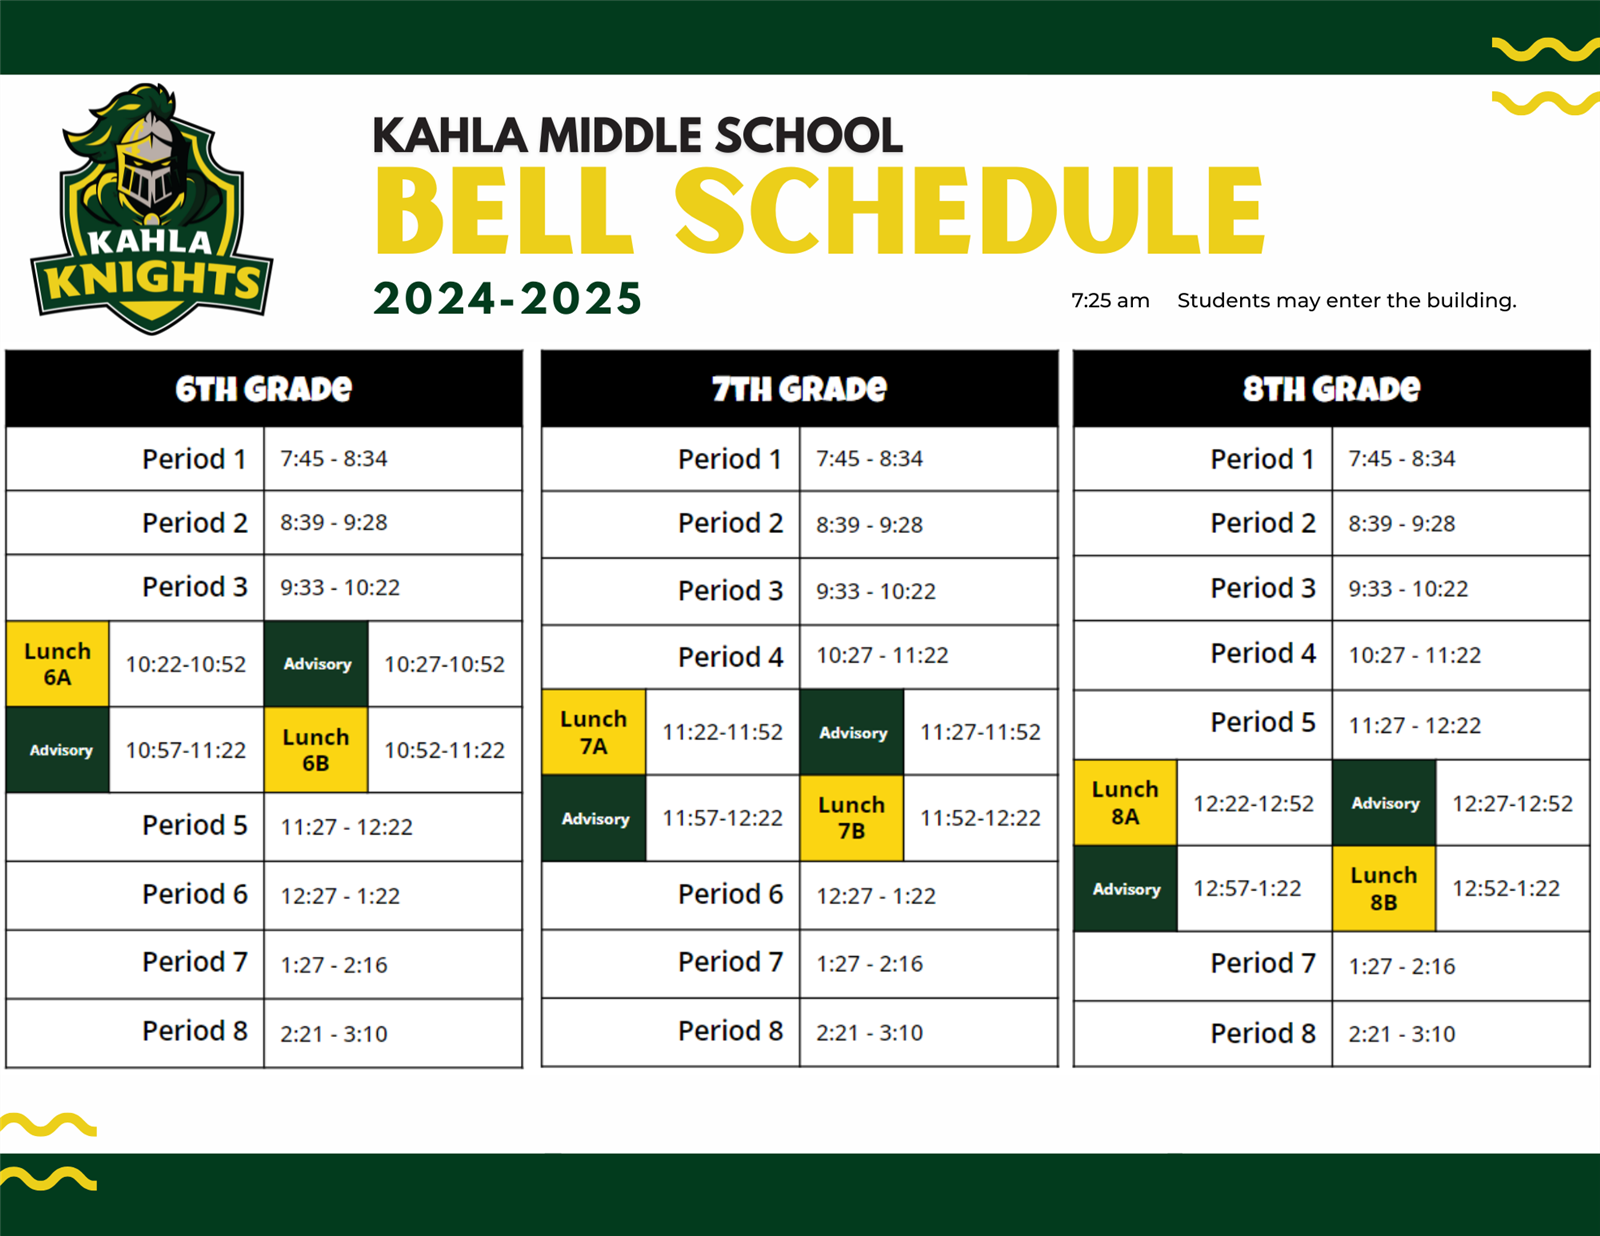 Description of the Bell Schedule : Kahla Middle School Bell Schedule 2023-2024. Students may enter the building @ 7:25